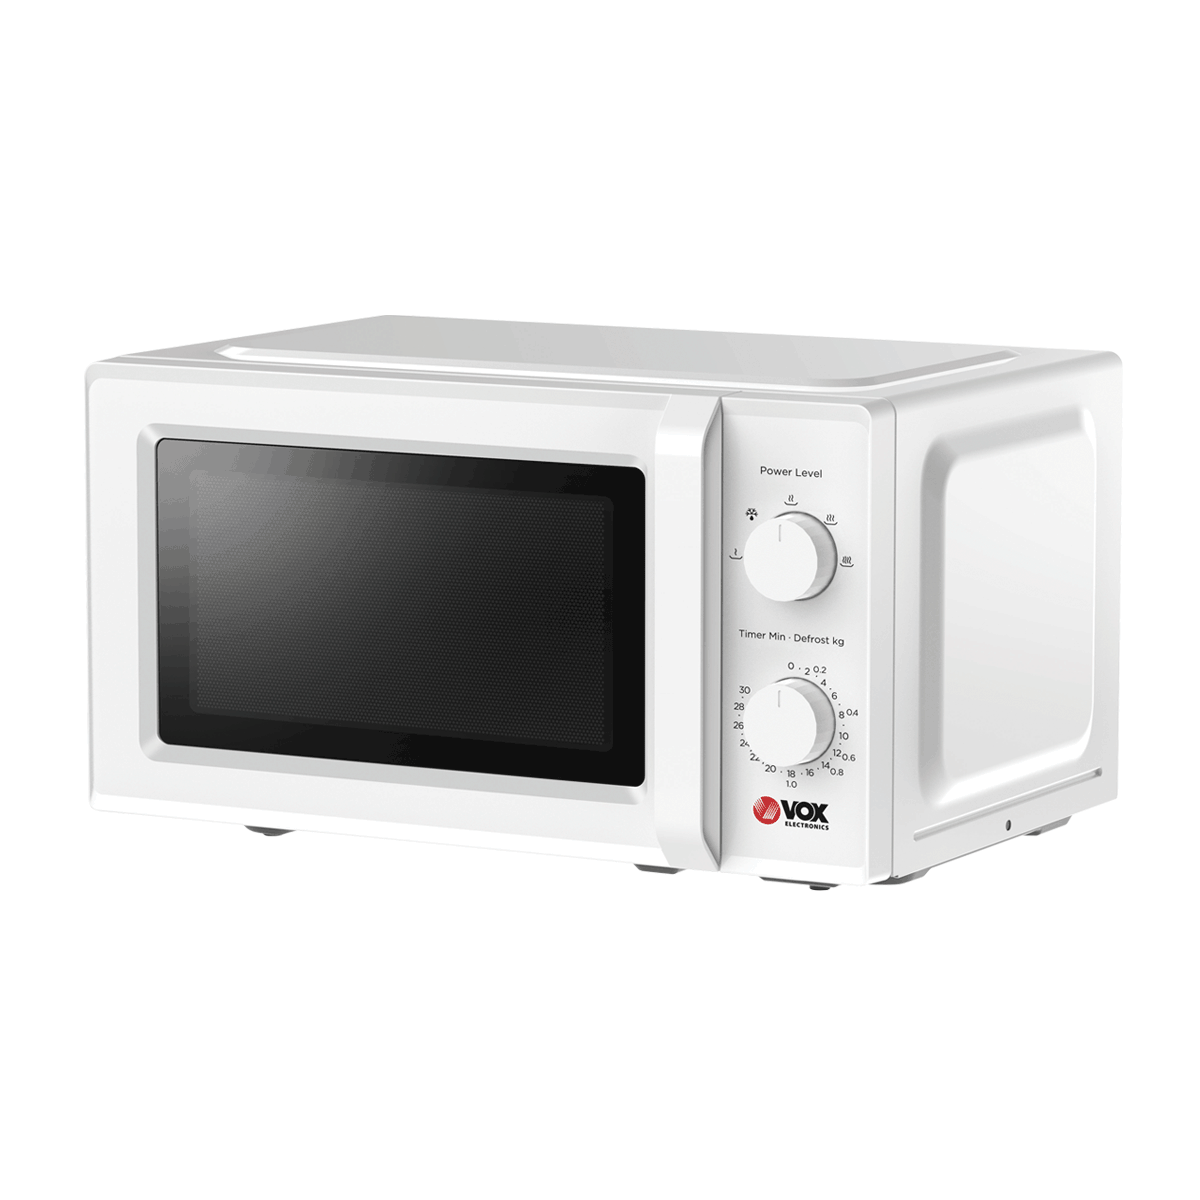 Built-in microwave oven MWH-M20 